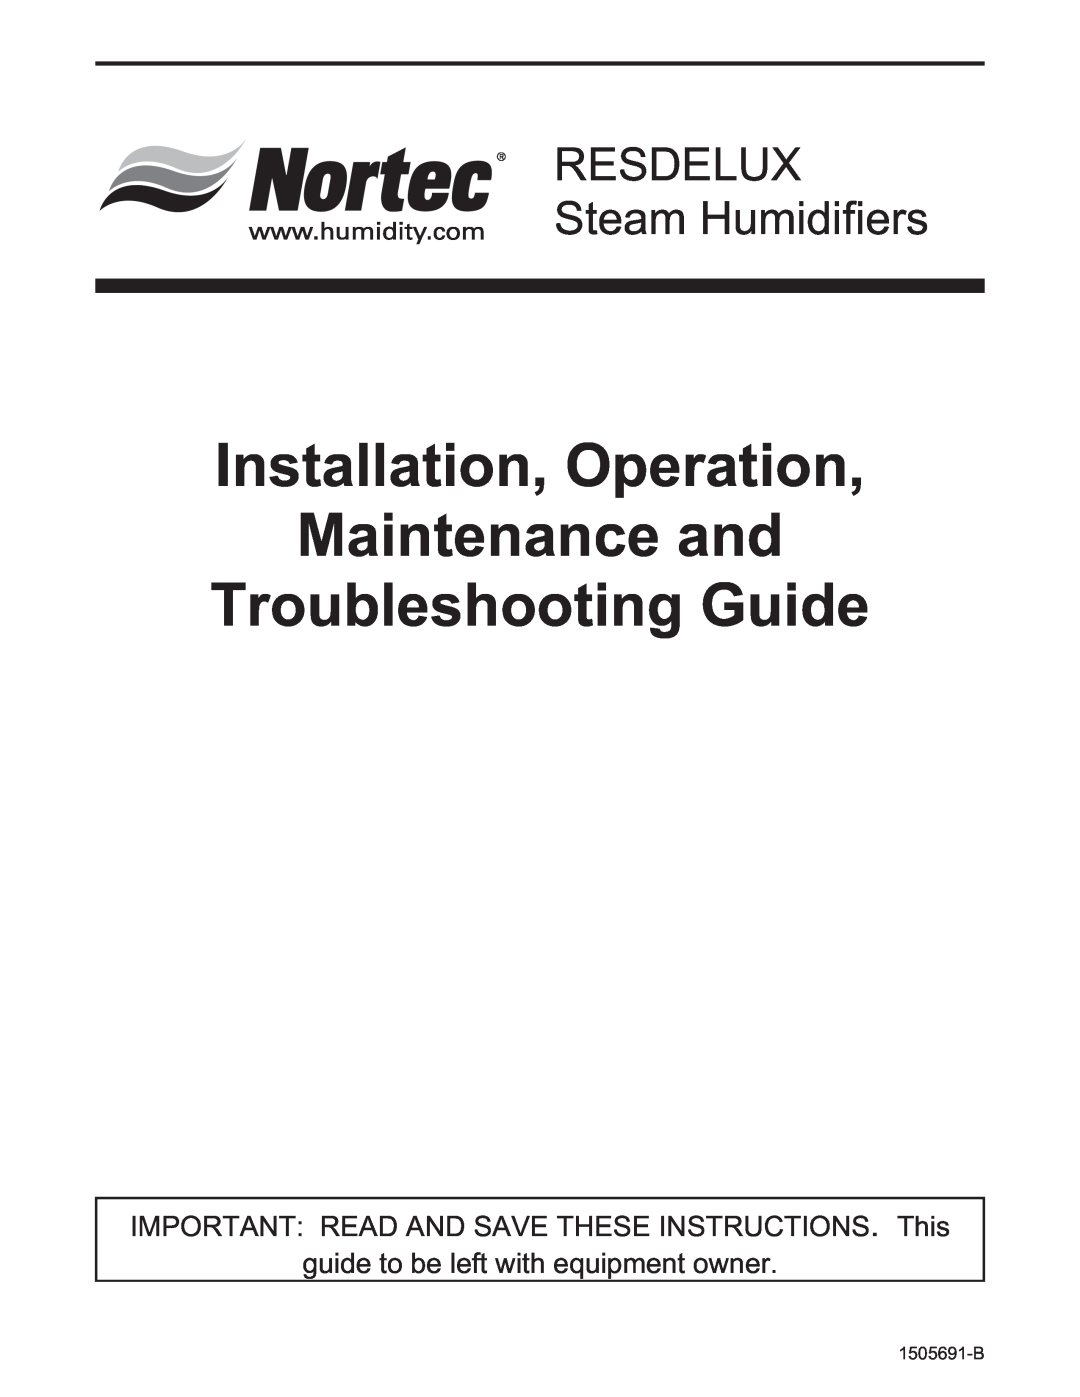 Nortec 1505691-B manual Installation, Operation Maintenance and, Troubleshooting Guide, RESDELUX Steam Humidifiers 